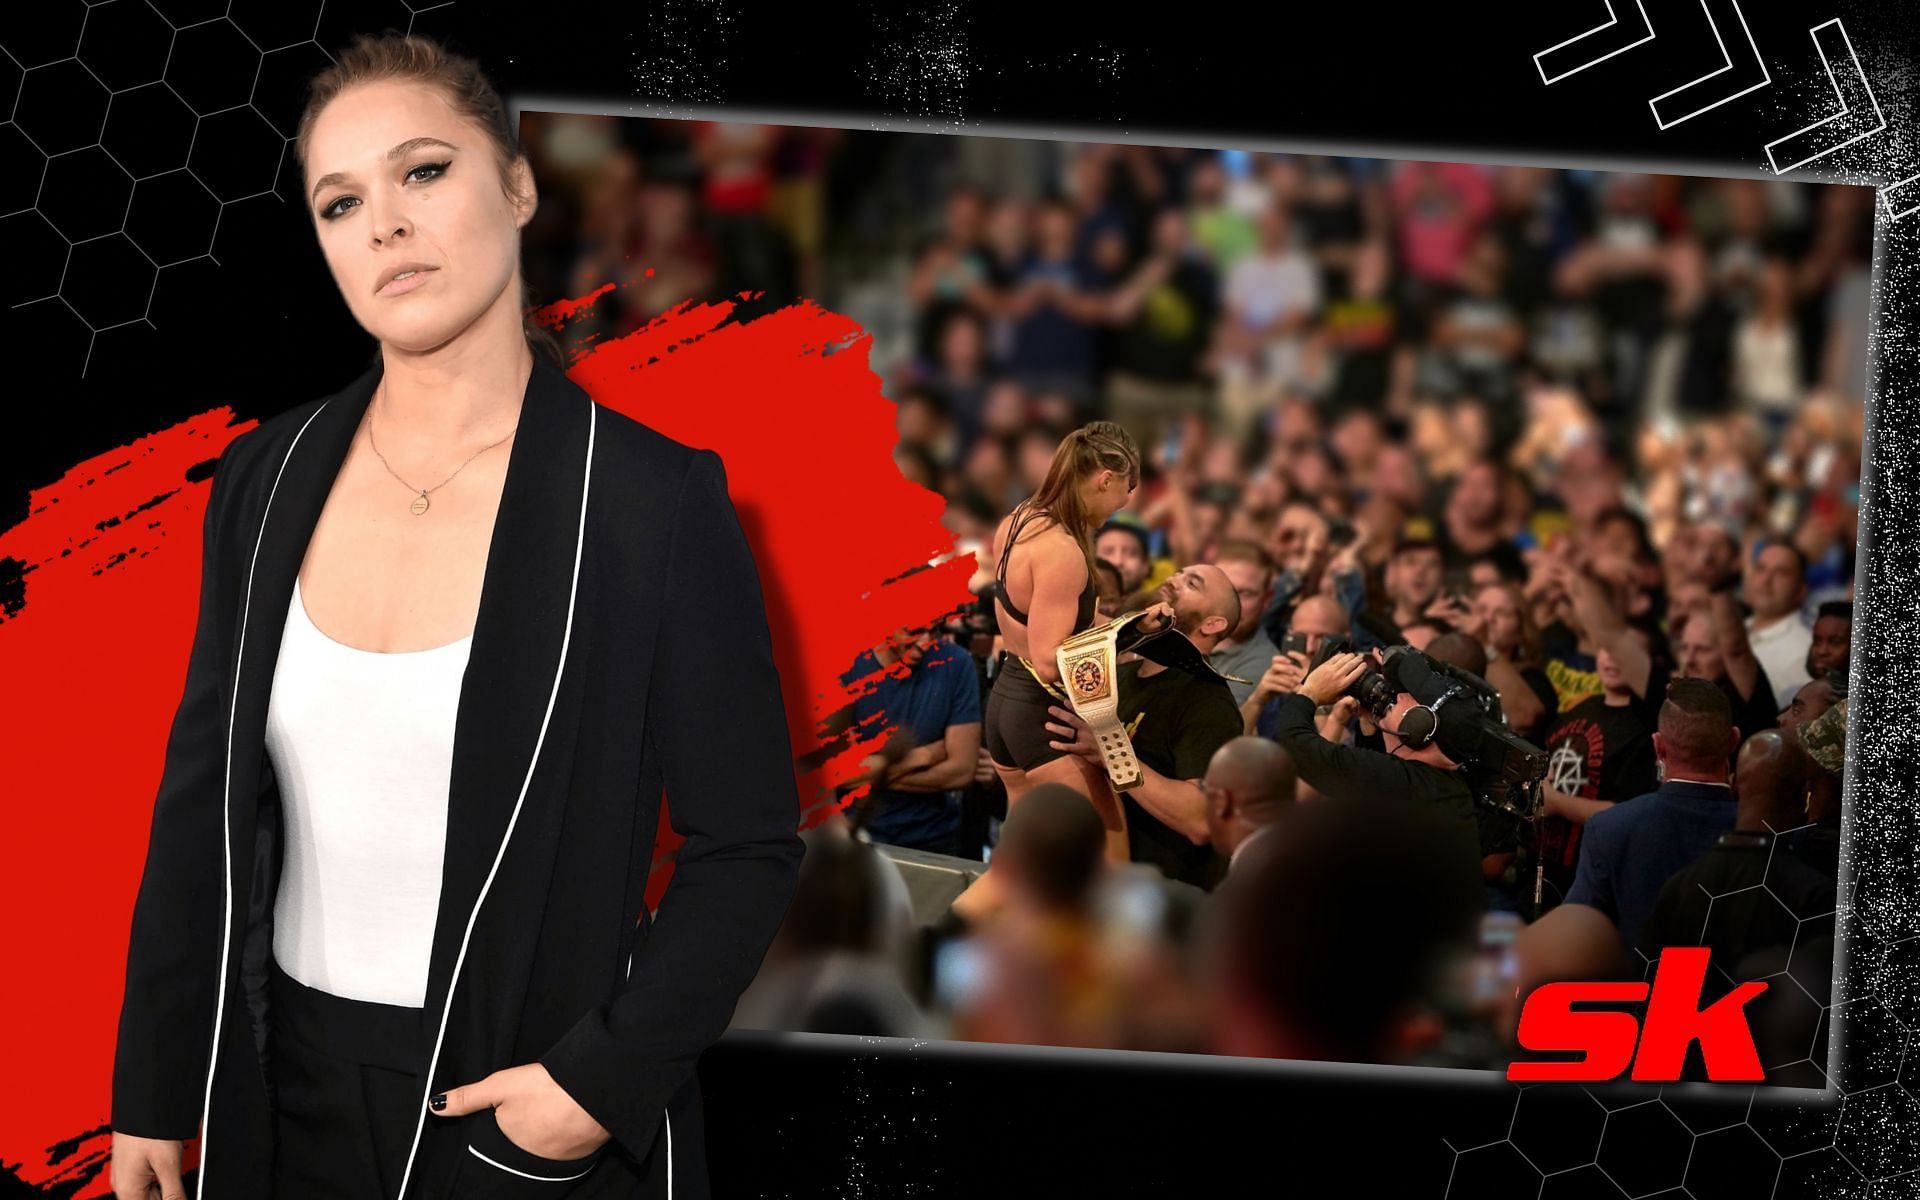 Ronda Rousey slams MMA fans for deserting fighters when they hit a rough patch. [Image credits: Getty Images]